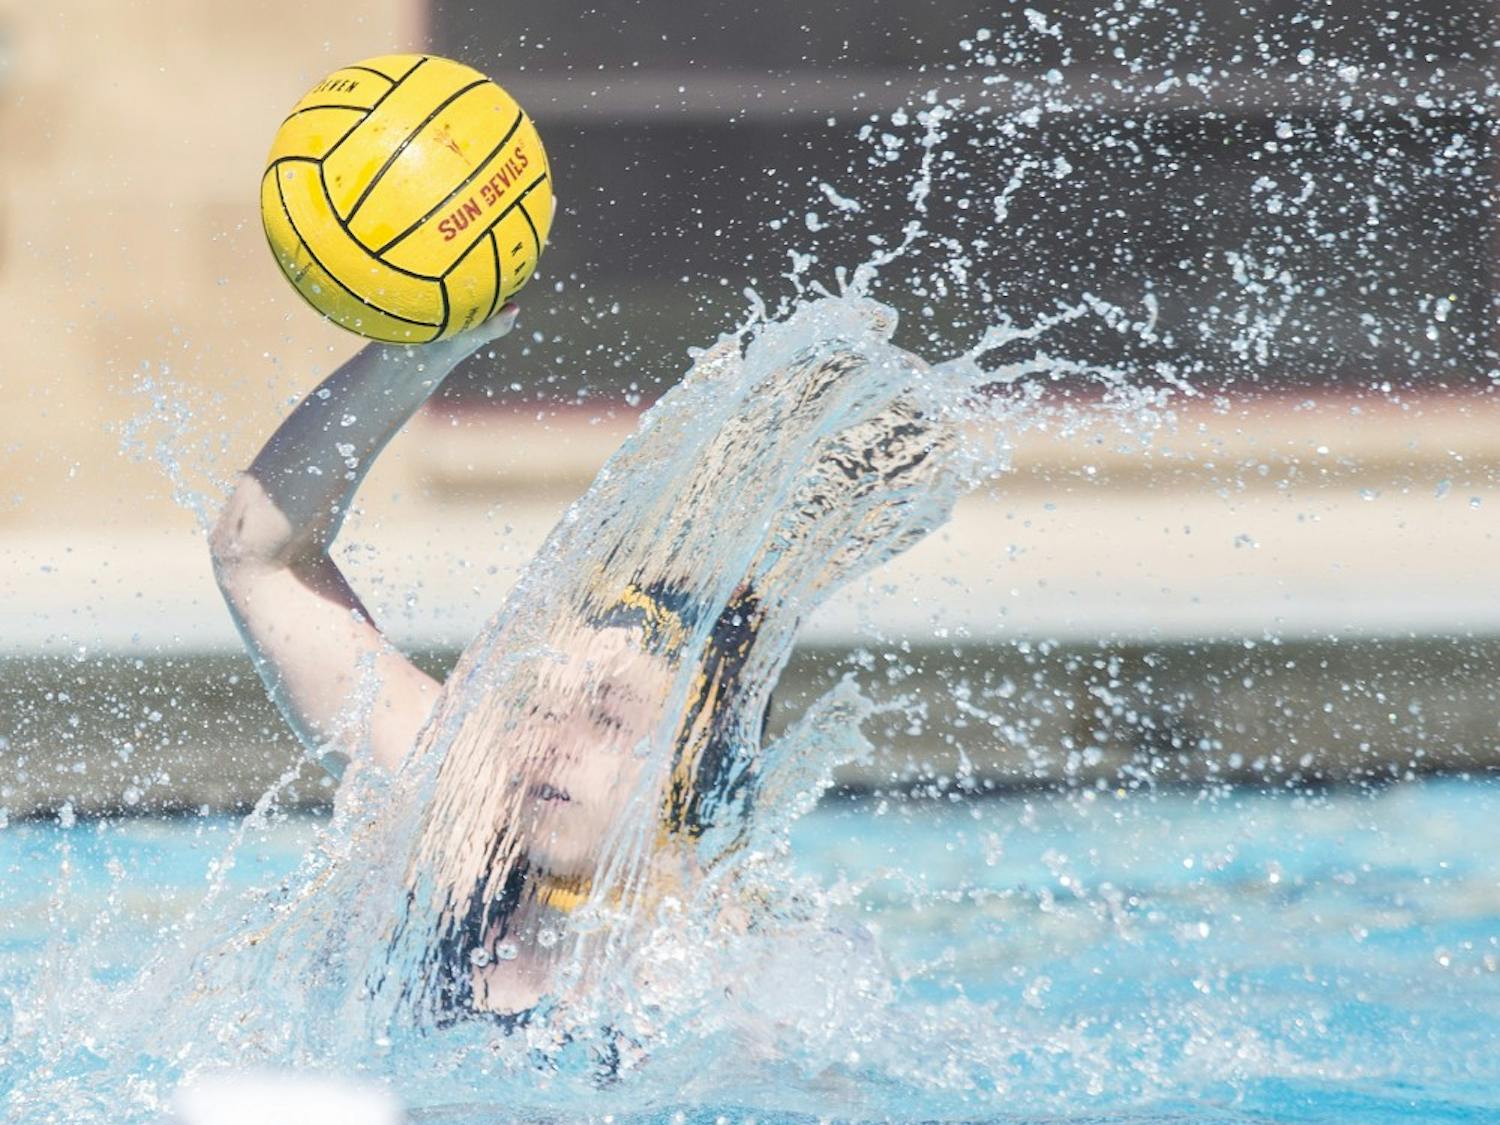 Sun Devil attacker Lena Mihailovic prepares to pass the ball during a game against the Indiana University Hoosiers at Mona Plummer Aquatic Center in Tempe, Ariz., on Sunday, Jan. 24, 2015. The Sun Devils won the game with a final score of 23-4. 